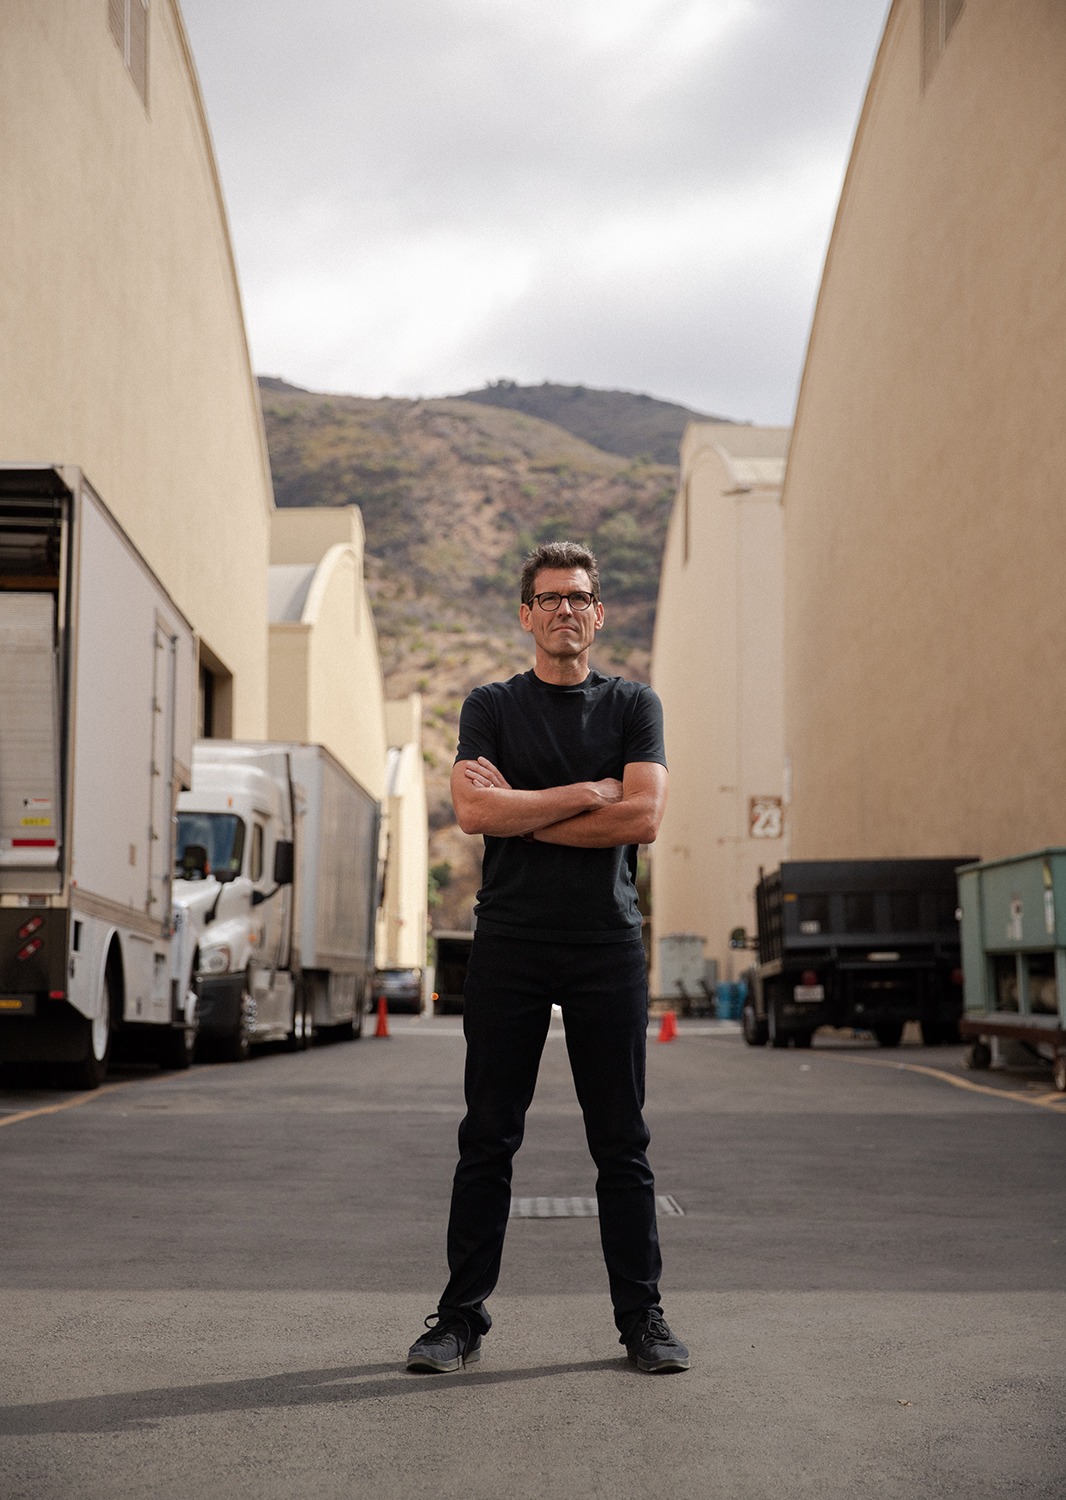 Jim standing with his arms crossed in between several buildings and parked trucks